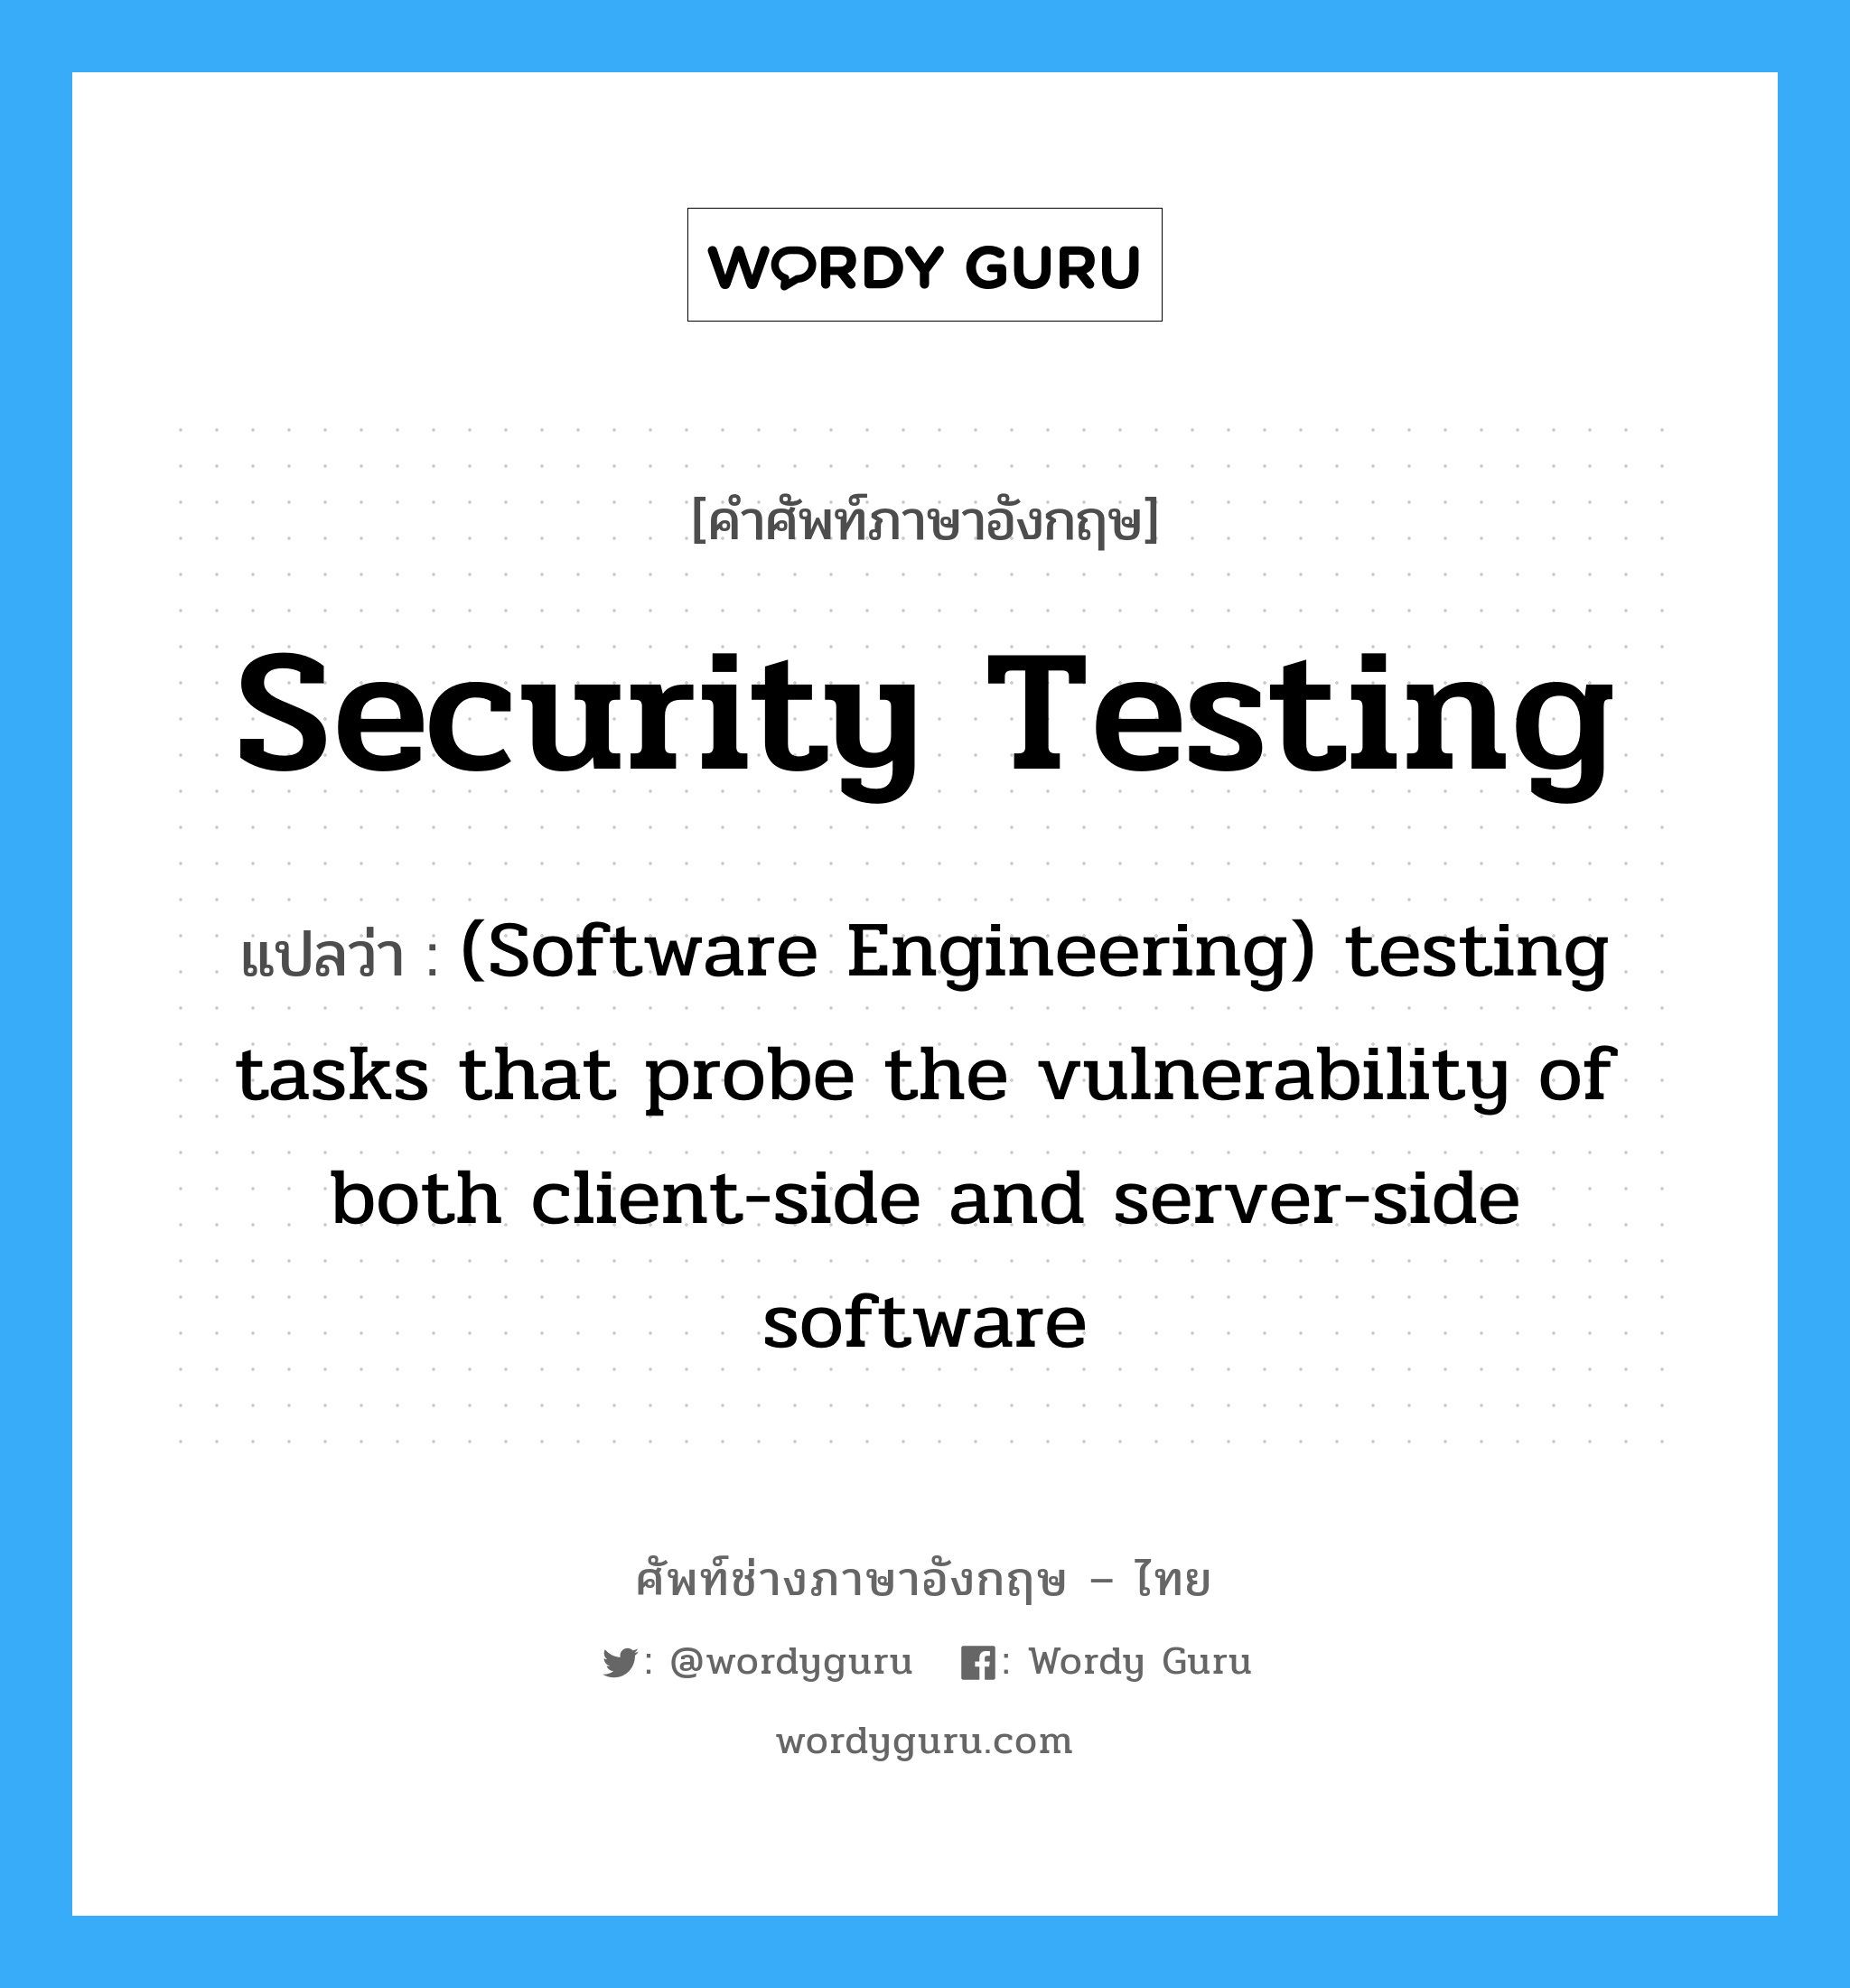 (Software Engineering) testing tasks that probe the vulnerability of both client-side and server-side software ภาษาอังกฤษ?, คำศัพท์ช่างภาษาอังกฤษ - ไทย (Software Engineering) testing tasks that probe the vulnerability of both client-side and server-side software คำศัพท์ภาษาอังกฤษ (Software Engineering) testing tasks that probe the vulnerability of both client-side and server-side software แปลว่า Security testing